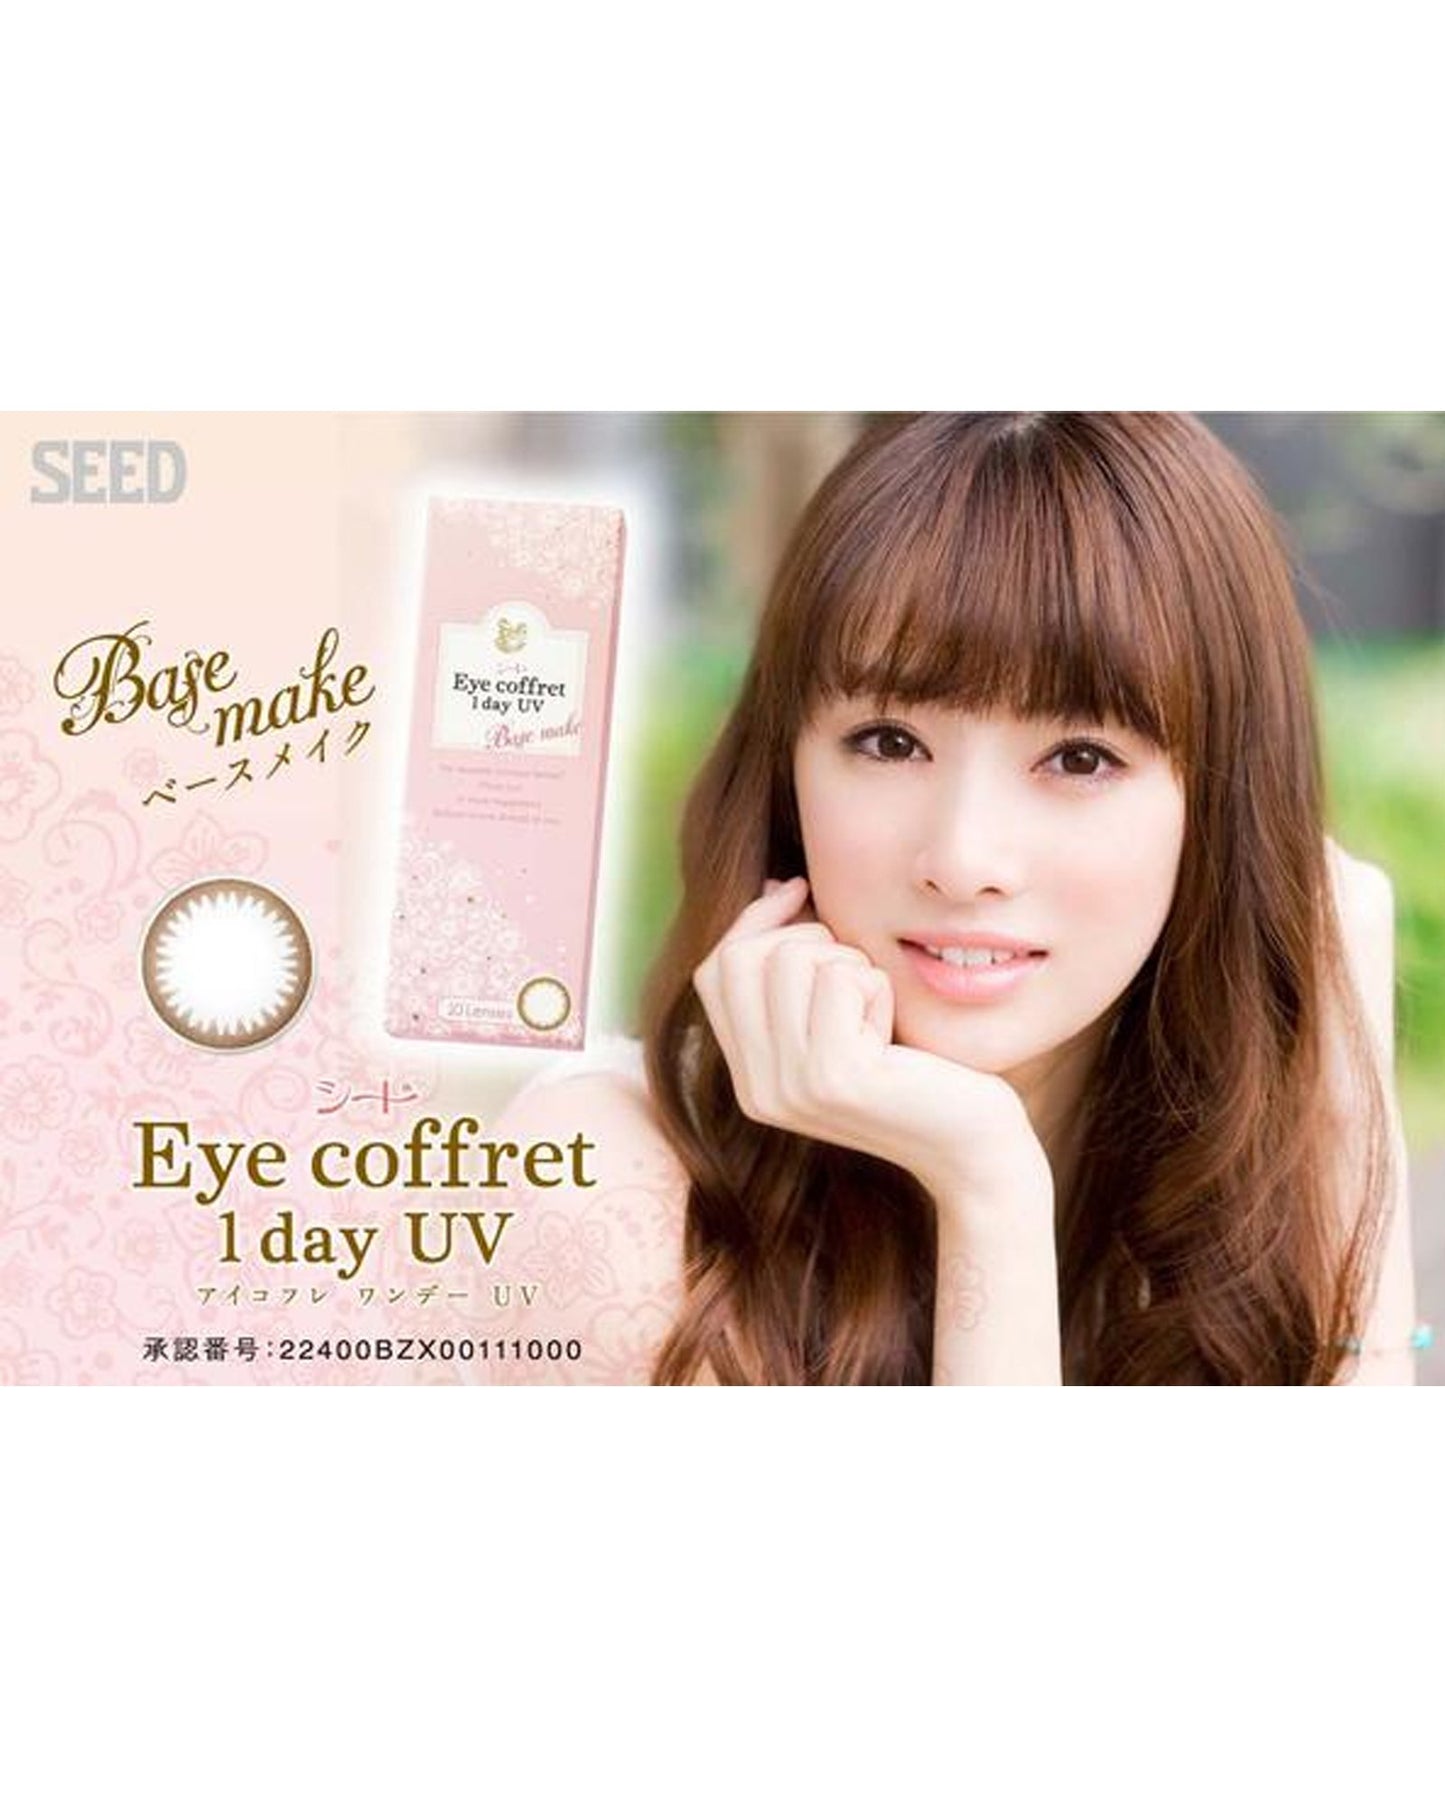 Eye Coffret 1 Day UV (30 Lenses pack) - Eleven Eleven Contact Lens and Vision Care Experts